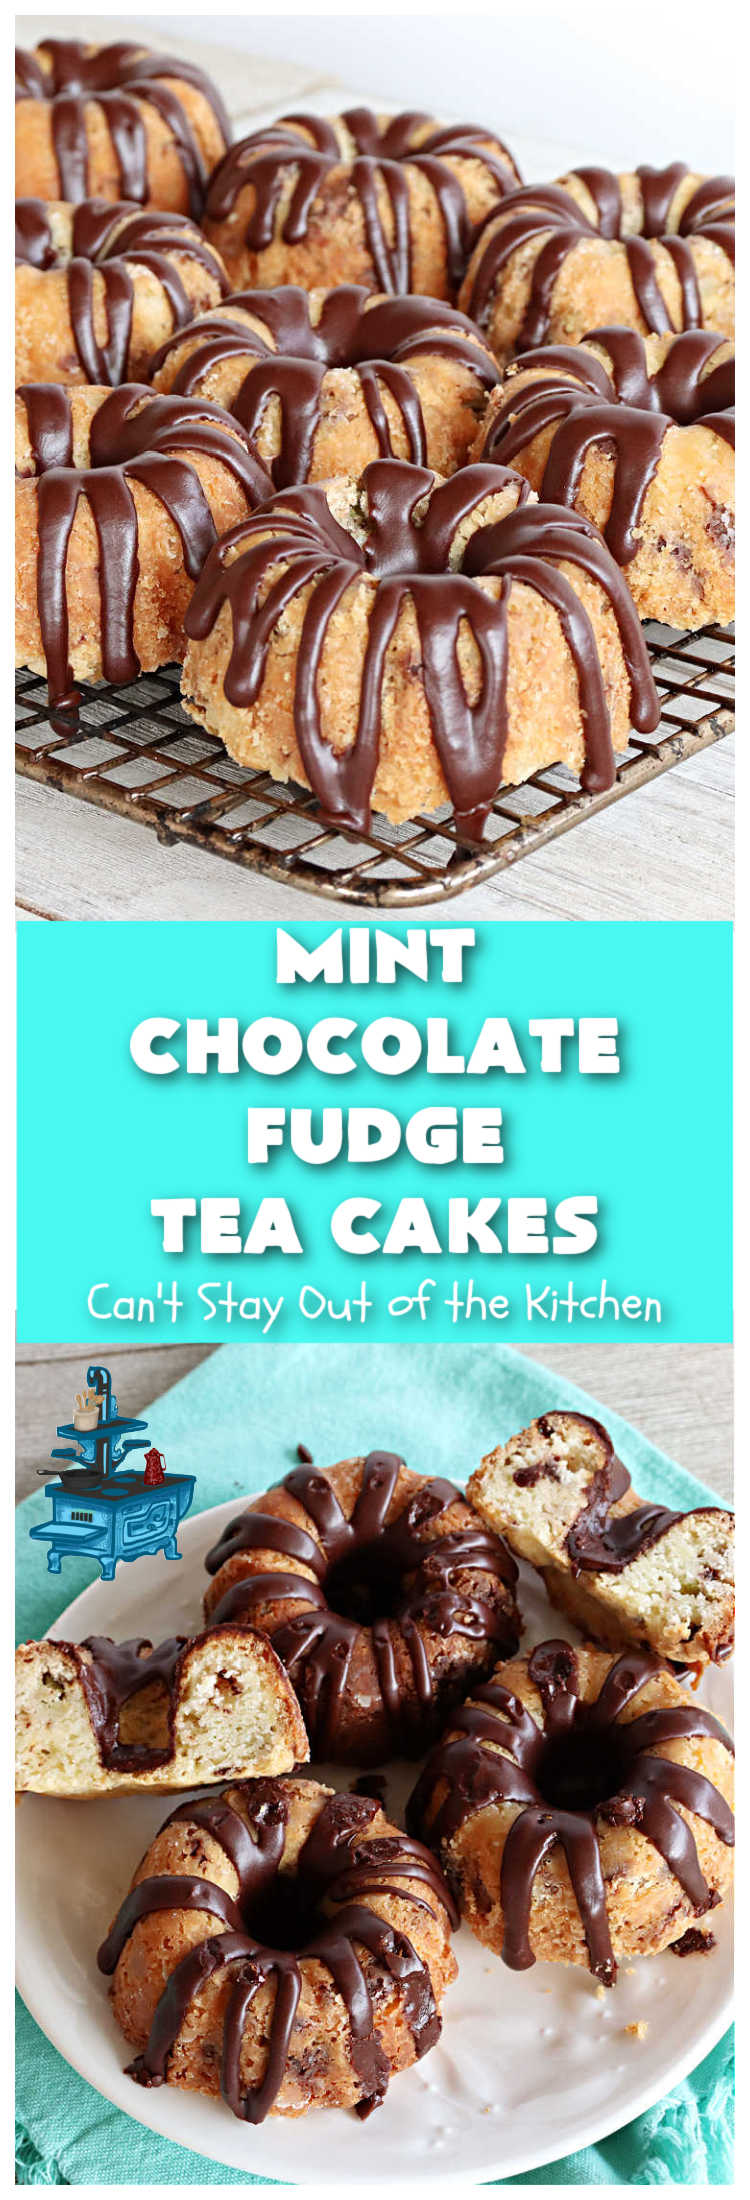 Mint Chocolate Fudge Tea Cakes | Can't Stay Out of the Kitchen | these breathtaking #TeaCakes include lots of #chocolate with just a hint of #mint. This dynamic duo of flavors is absolutely irresistible. This #dessert is so mouthwatering & irresistible you'll put it on your menu frequently. Great for #holidays, special occasions and potlucks. #cake #ChocolateDessert #HolidayDessert #Bundt #MintChocolateFudgeTeaCakes